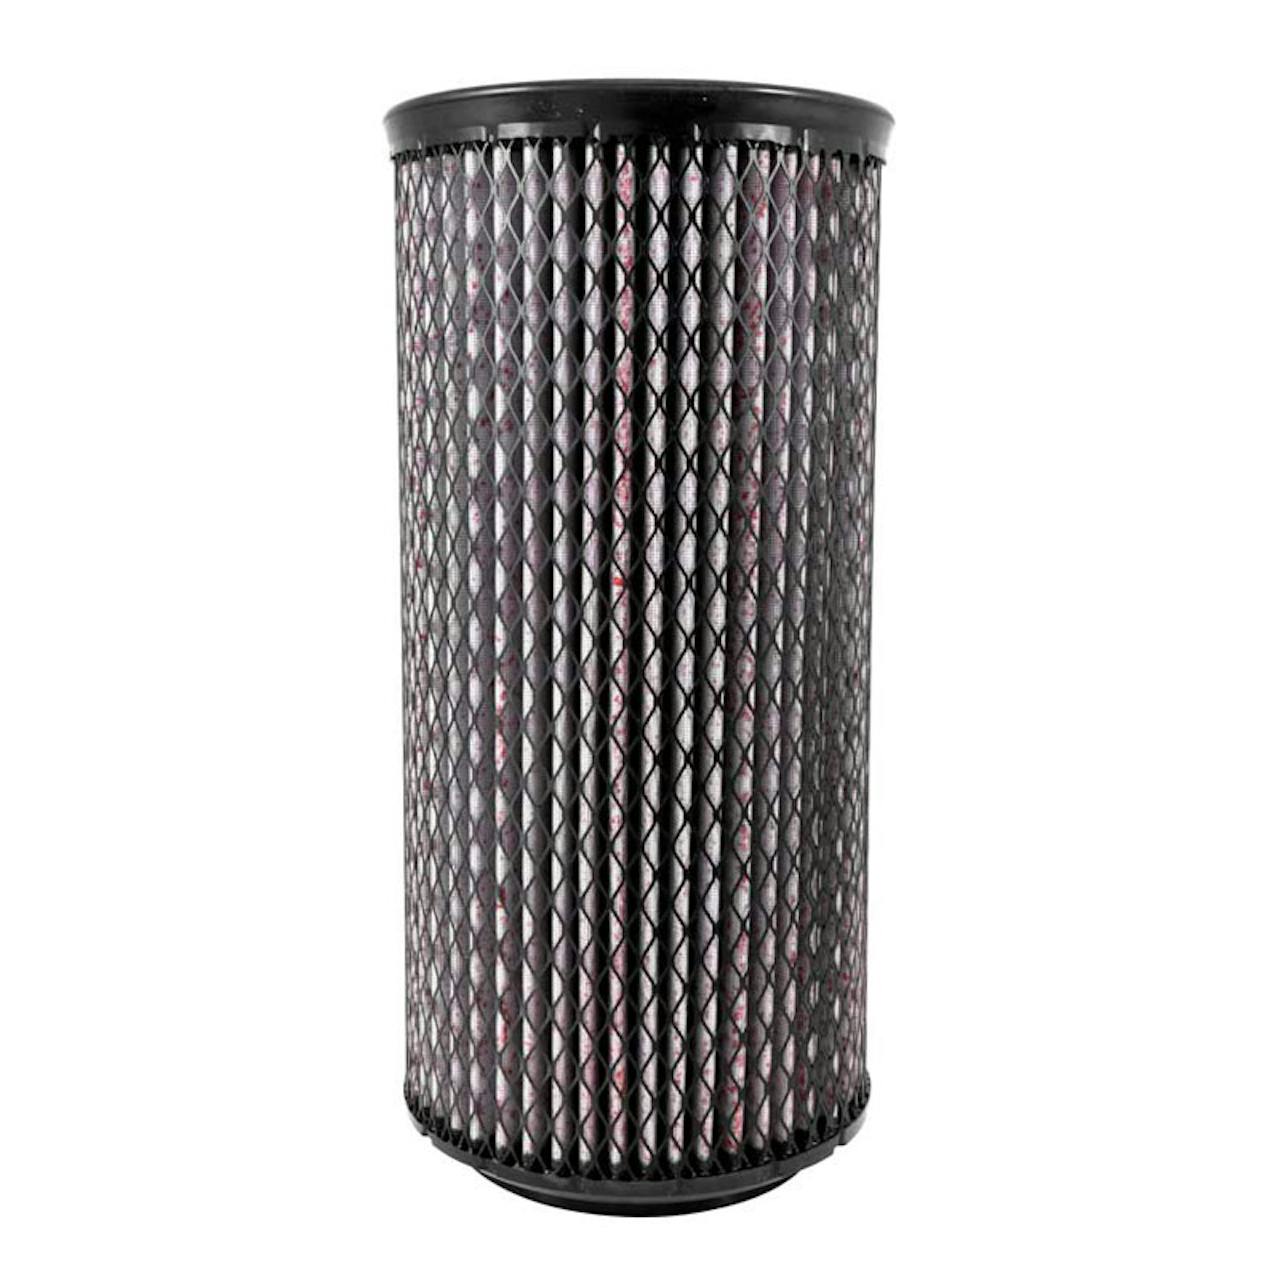 K&N Synthetic Air Filter Cleaner - Free Shipping - NAPA Auto Parts